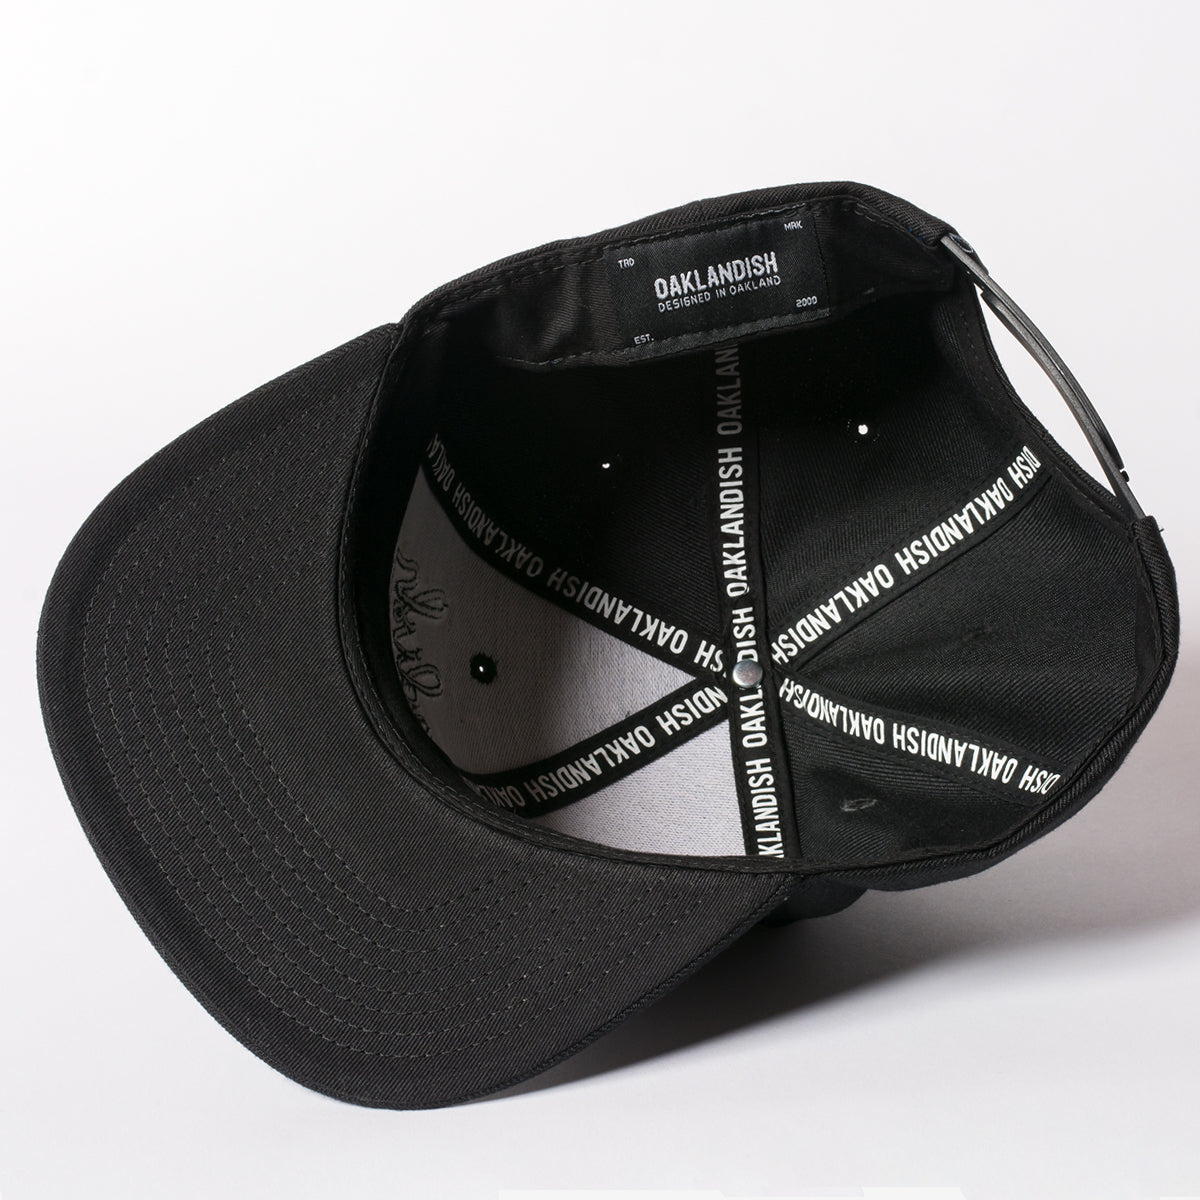 The underside of a black Oaklandish cap with Oaklandish wordmarks on the taping and Oaklandish tag. 